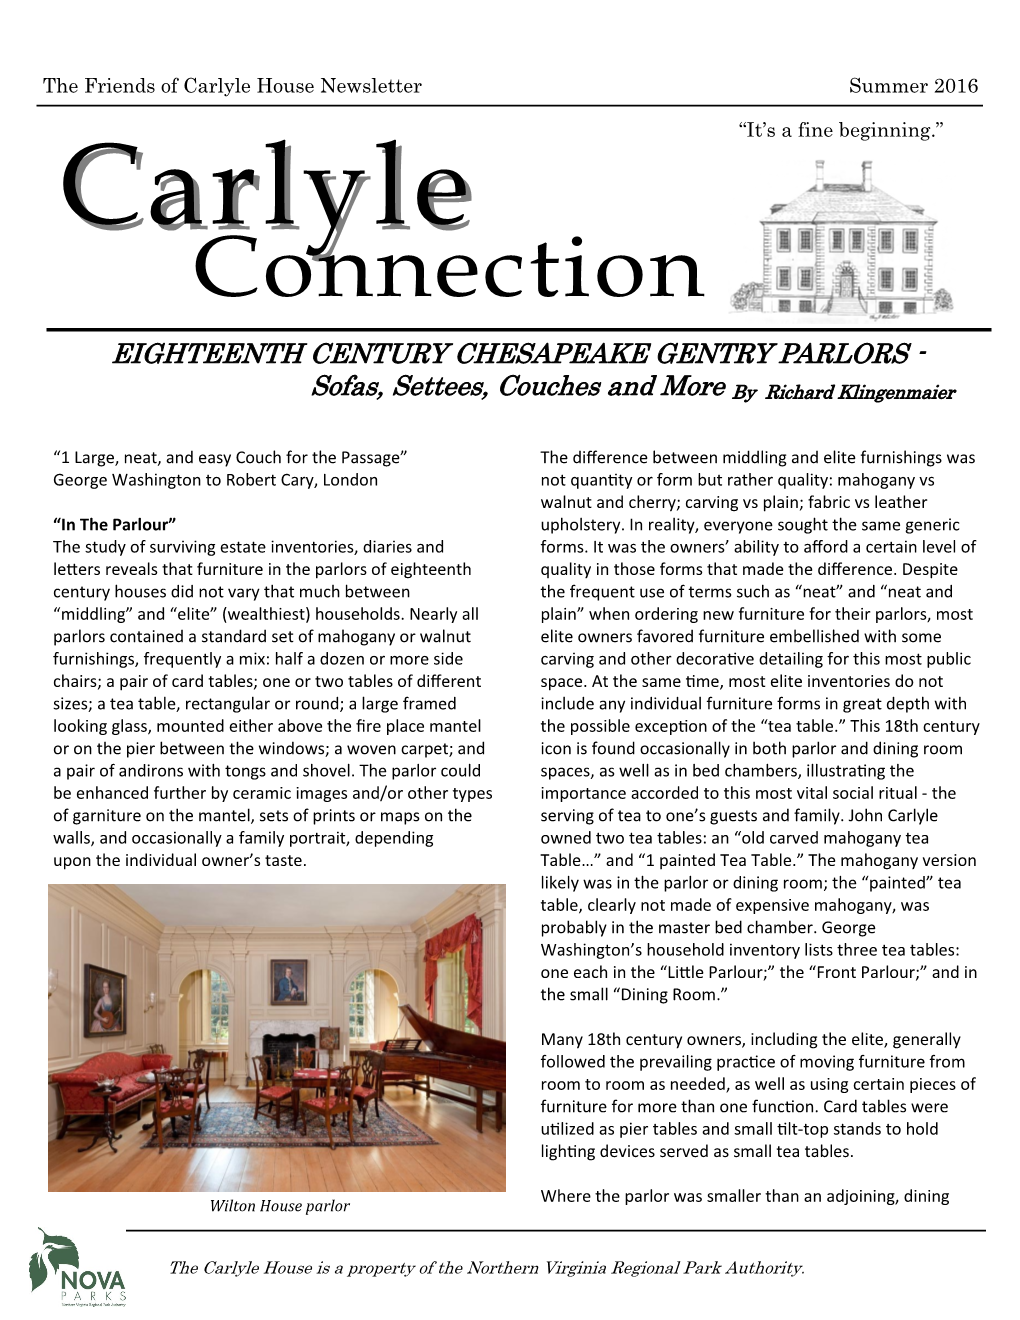 Carlyle Connection EIGHTEENTH CENTURY CHESAPEAKE GENTRY PARLORS - Sofas, Settees, Couches and More by Richard Klingenmaier